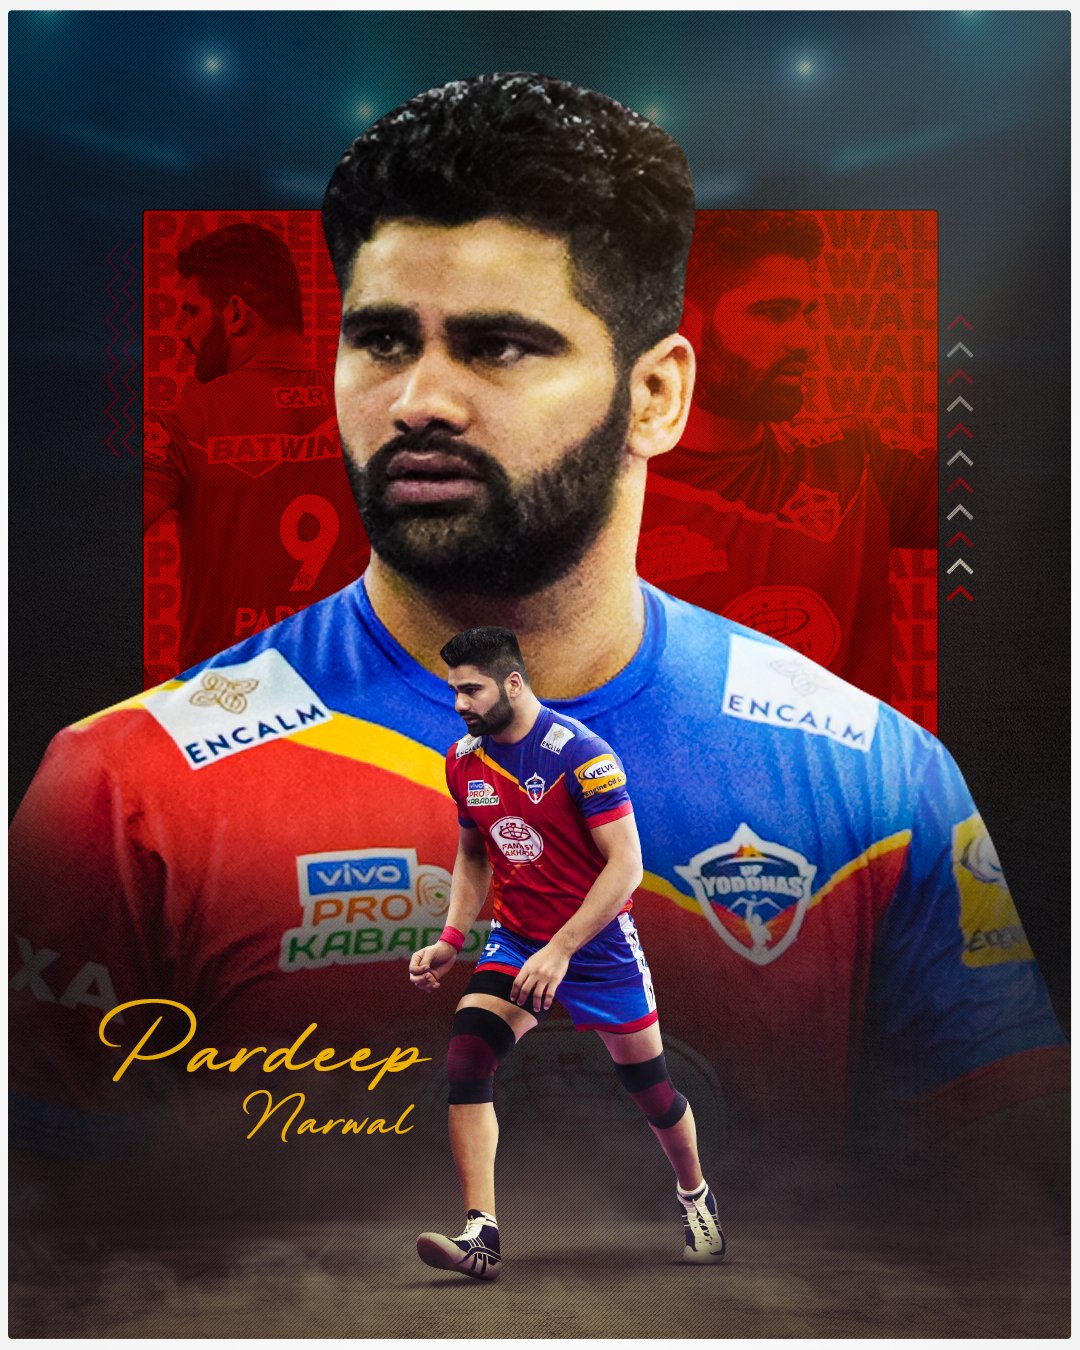 Achievements of Pardeep Narwal